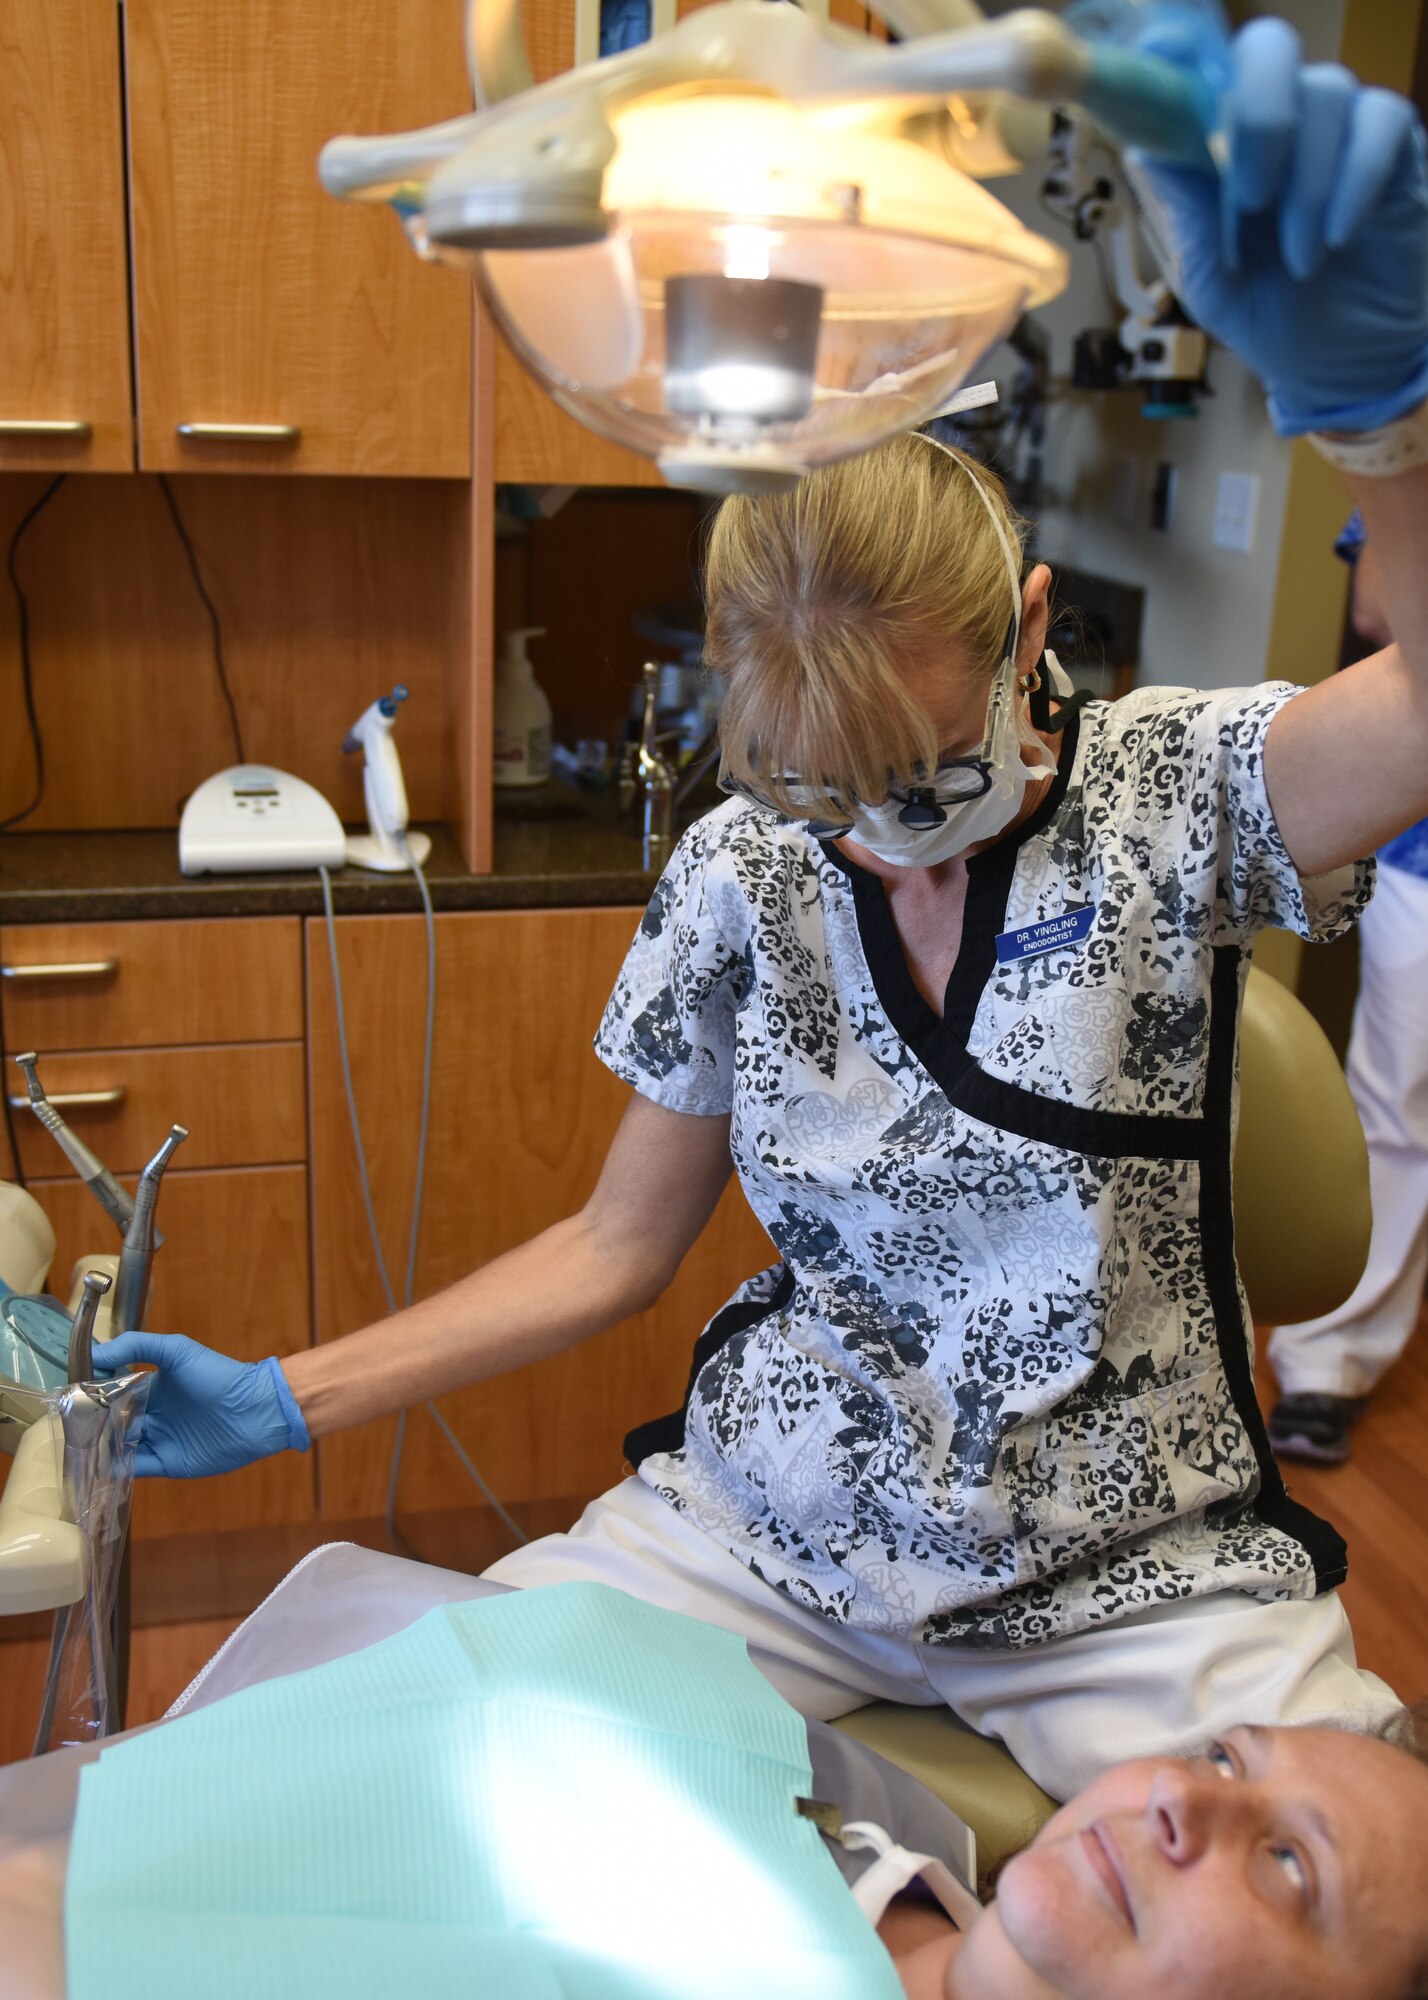 Dr. Nicole Yingling, endodontist and owner of Mason-Dixon Endodontics, Chambersburg, Pennsylvania, prepares to perform a checkup of previous work done on a patient Oct. 1, 2018. Yingling began her career as a general dentist and later specialized in endodontics, which focuses on the treatment of root canals. Yingling served 11 years as an active duty dentist and after a 12-year break-in-service, enlisted into the 193rd Special Operations Medical Group, Middletown, Pennsylvania. (U.S. Air National Guard photo by Senior Airman Julia Sorber/Released)